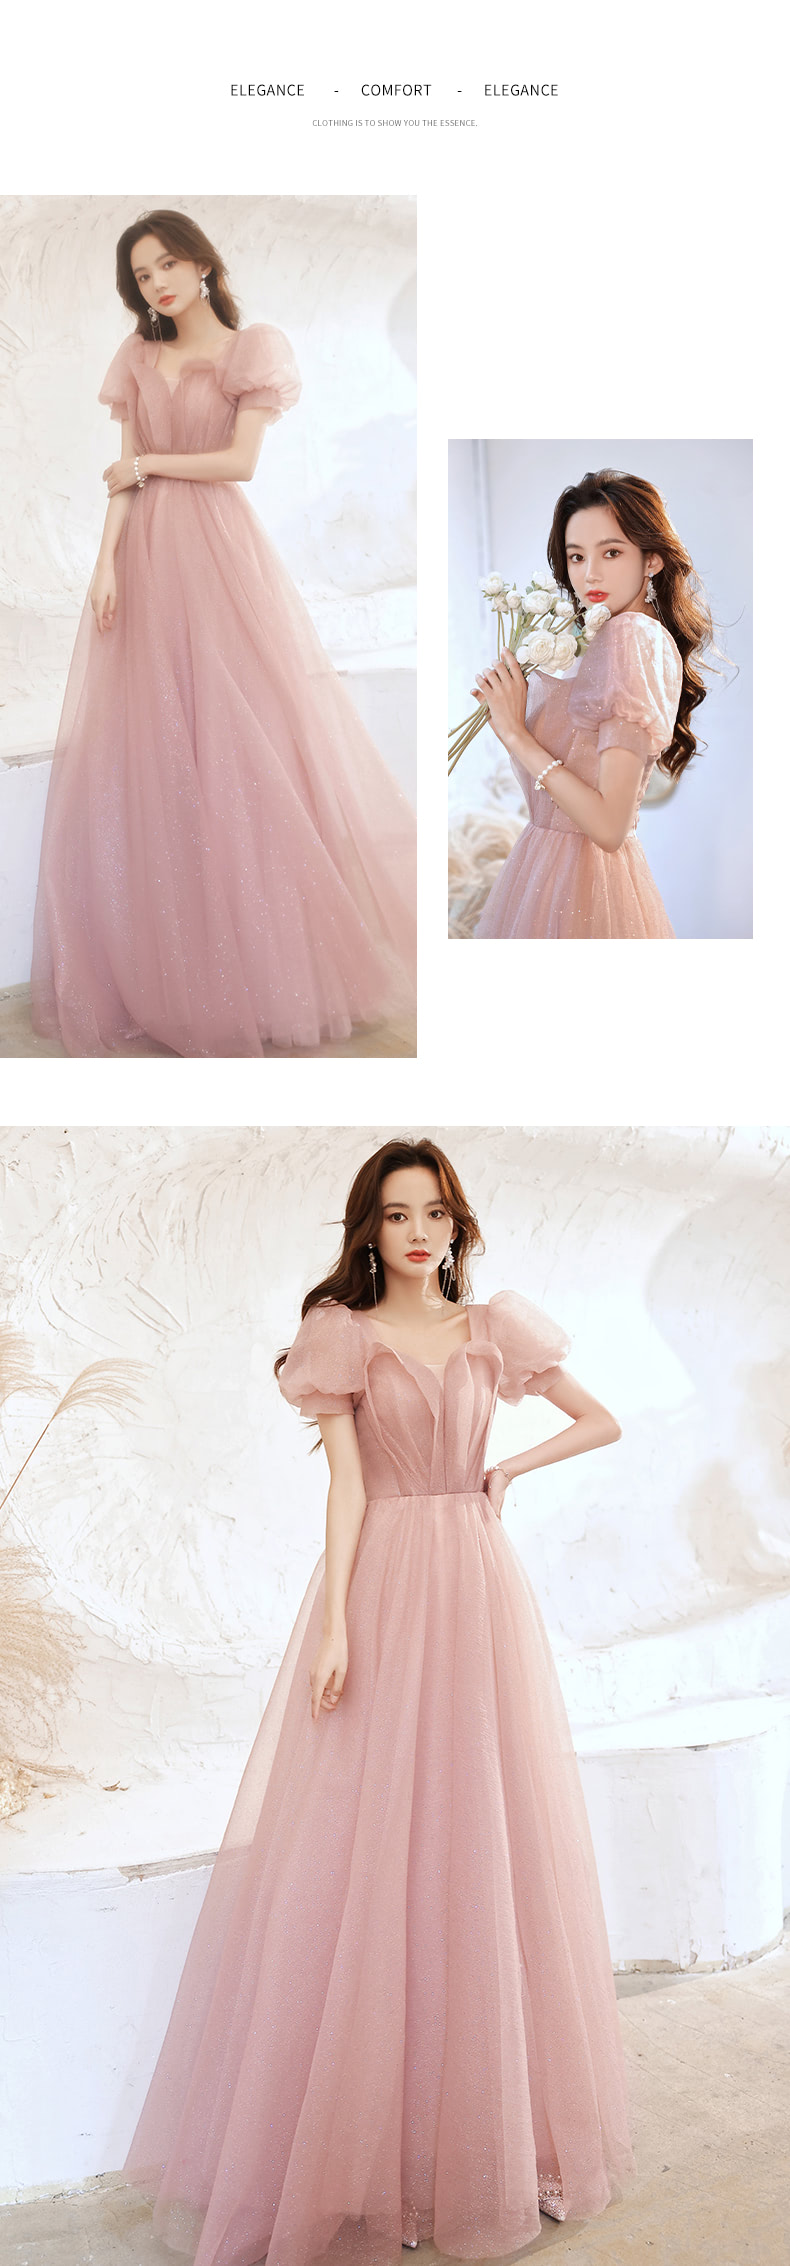 Romantic-Pink-Tulle-Short-Sleeve-Party-Ball-Gown-Formal-Long-Dress12.jpg